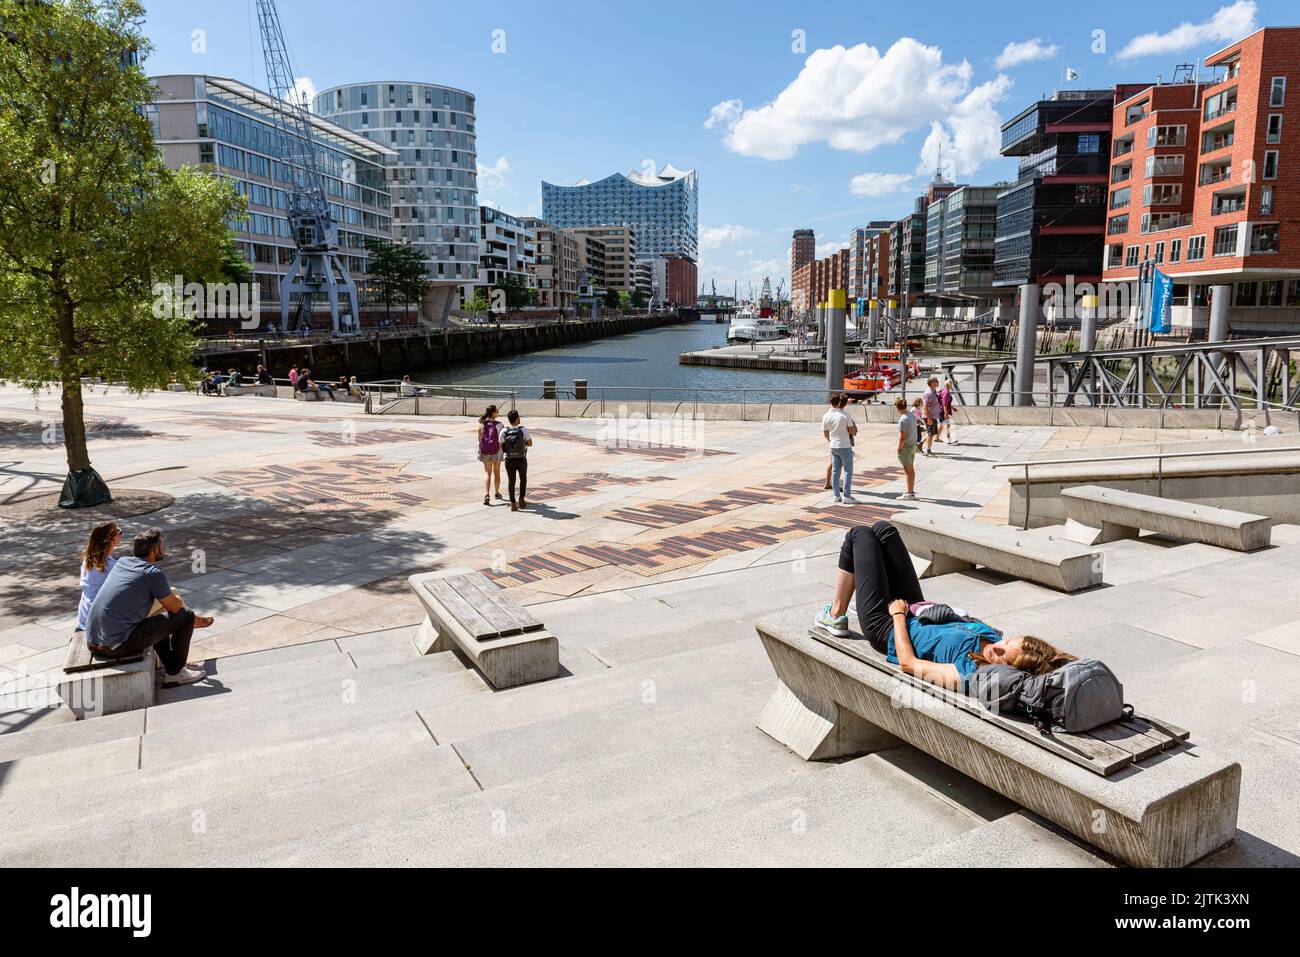 People lie and sit on the Magellan Terraces in the summer sun and look out over the Elbphilharmonie and Hamburg's Hafencity, Hamburg, Germany Stock Photo